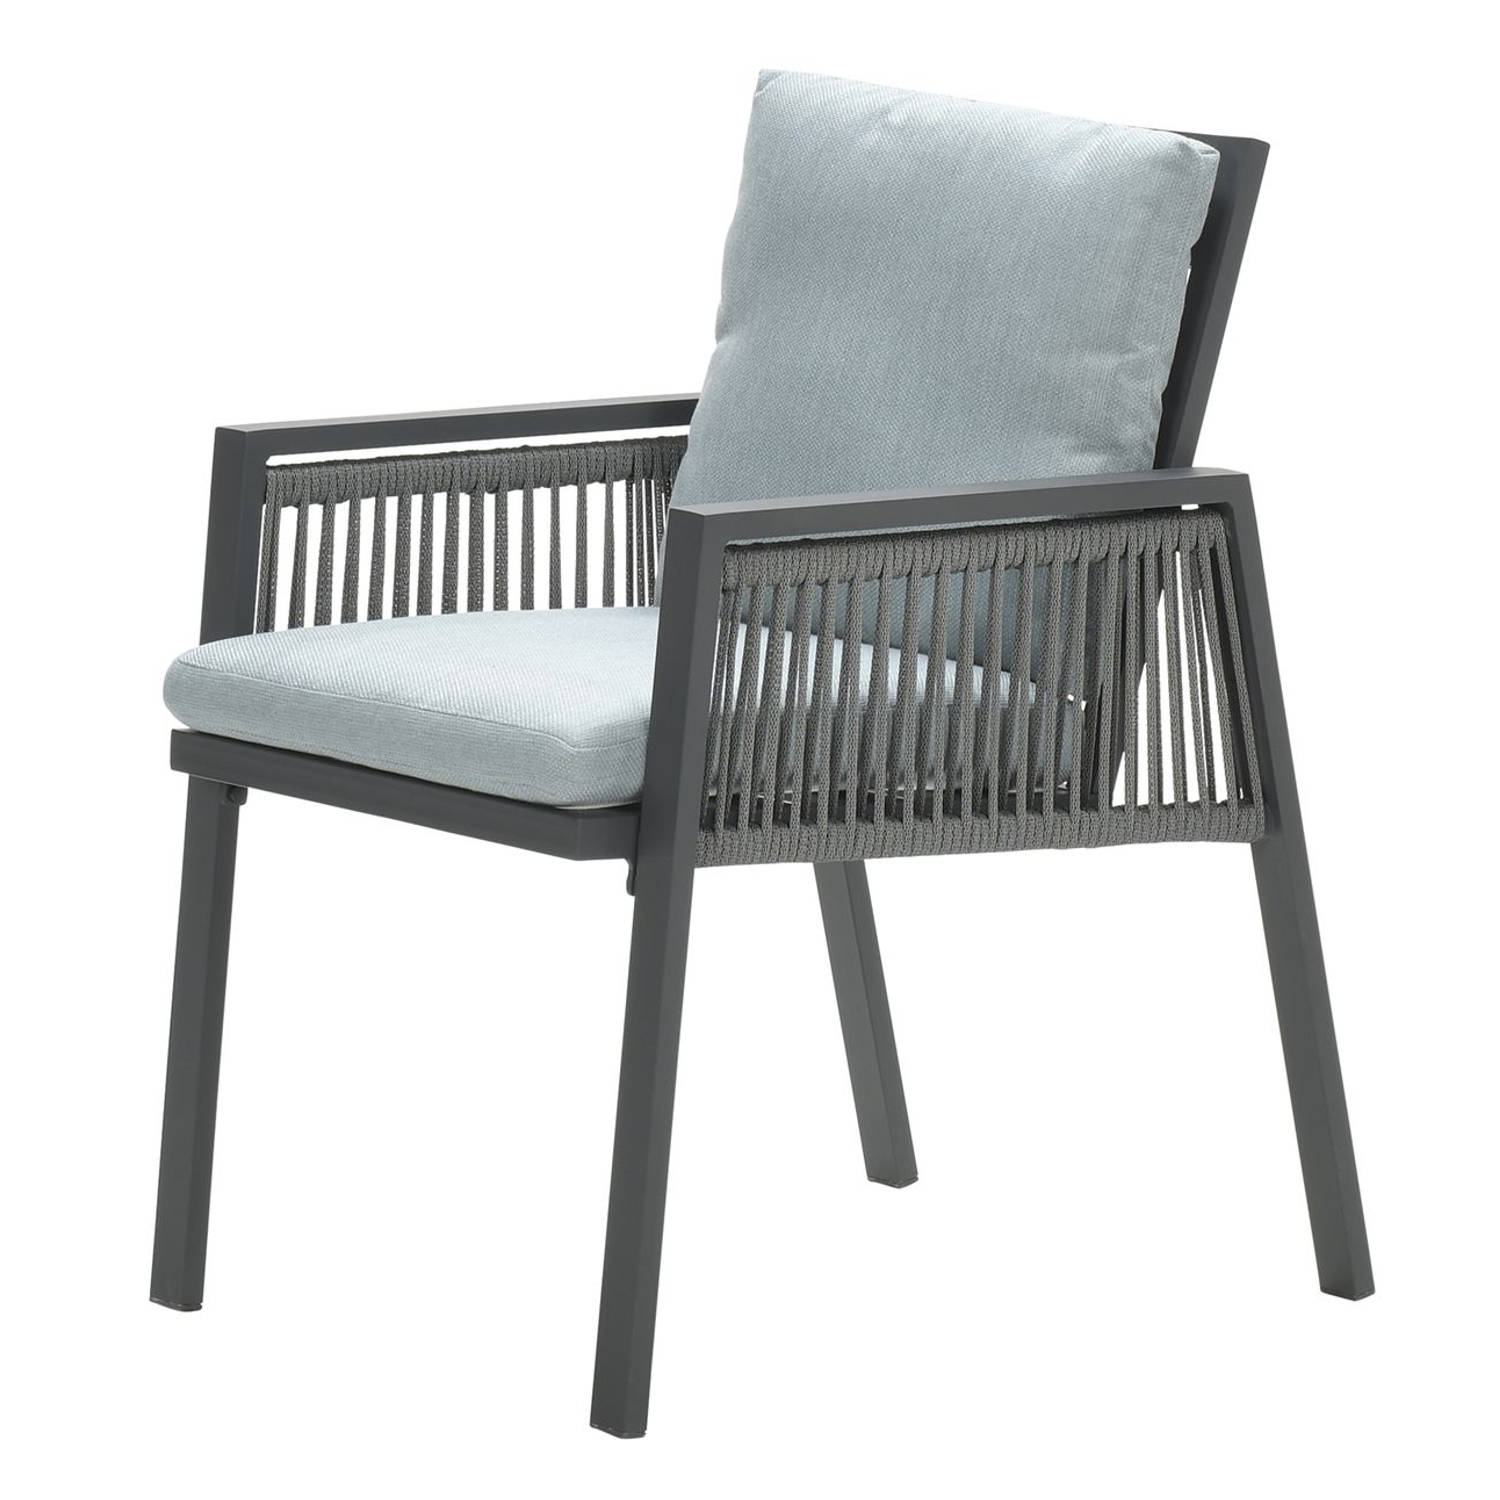 Garden Impressions Andrea dining fauteuil rope carbon black- mint grey